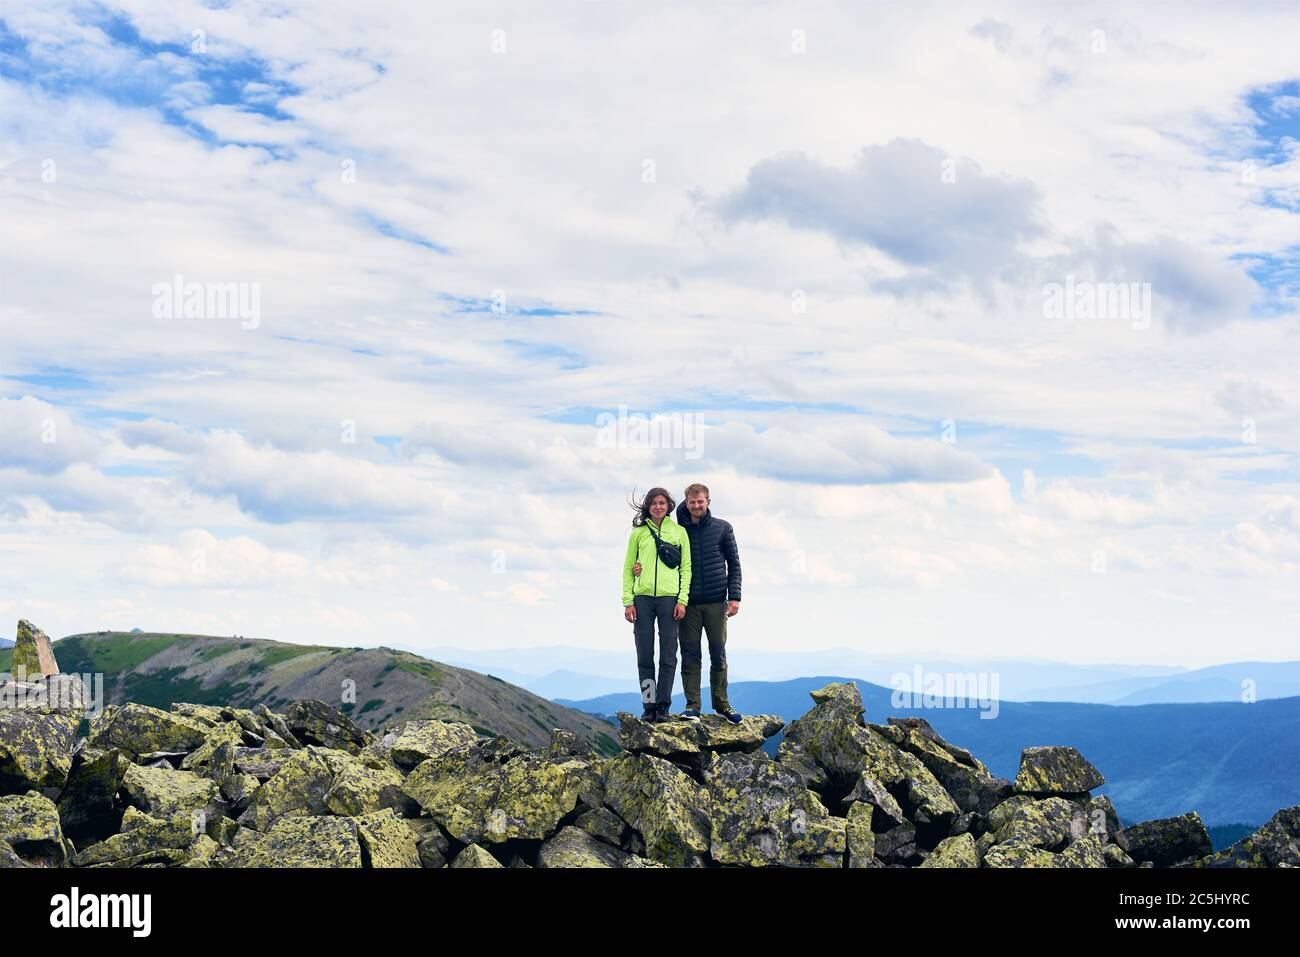 Front view of loving couple hugging, posing and looking at camera, beautiful mountains scenery on background. Mountain hiking, tourists reaching peak together. Wild nature, sport tourism concept. Stock Photo